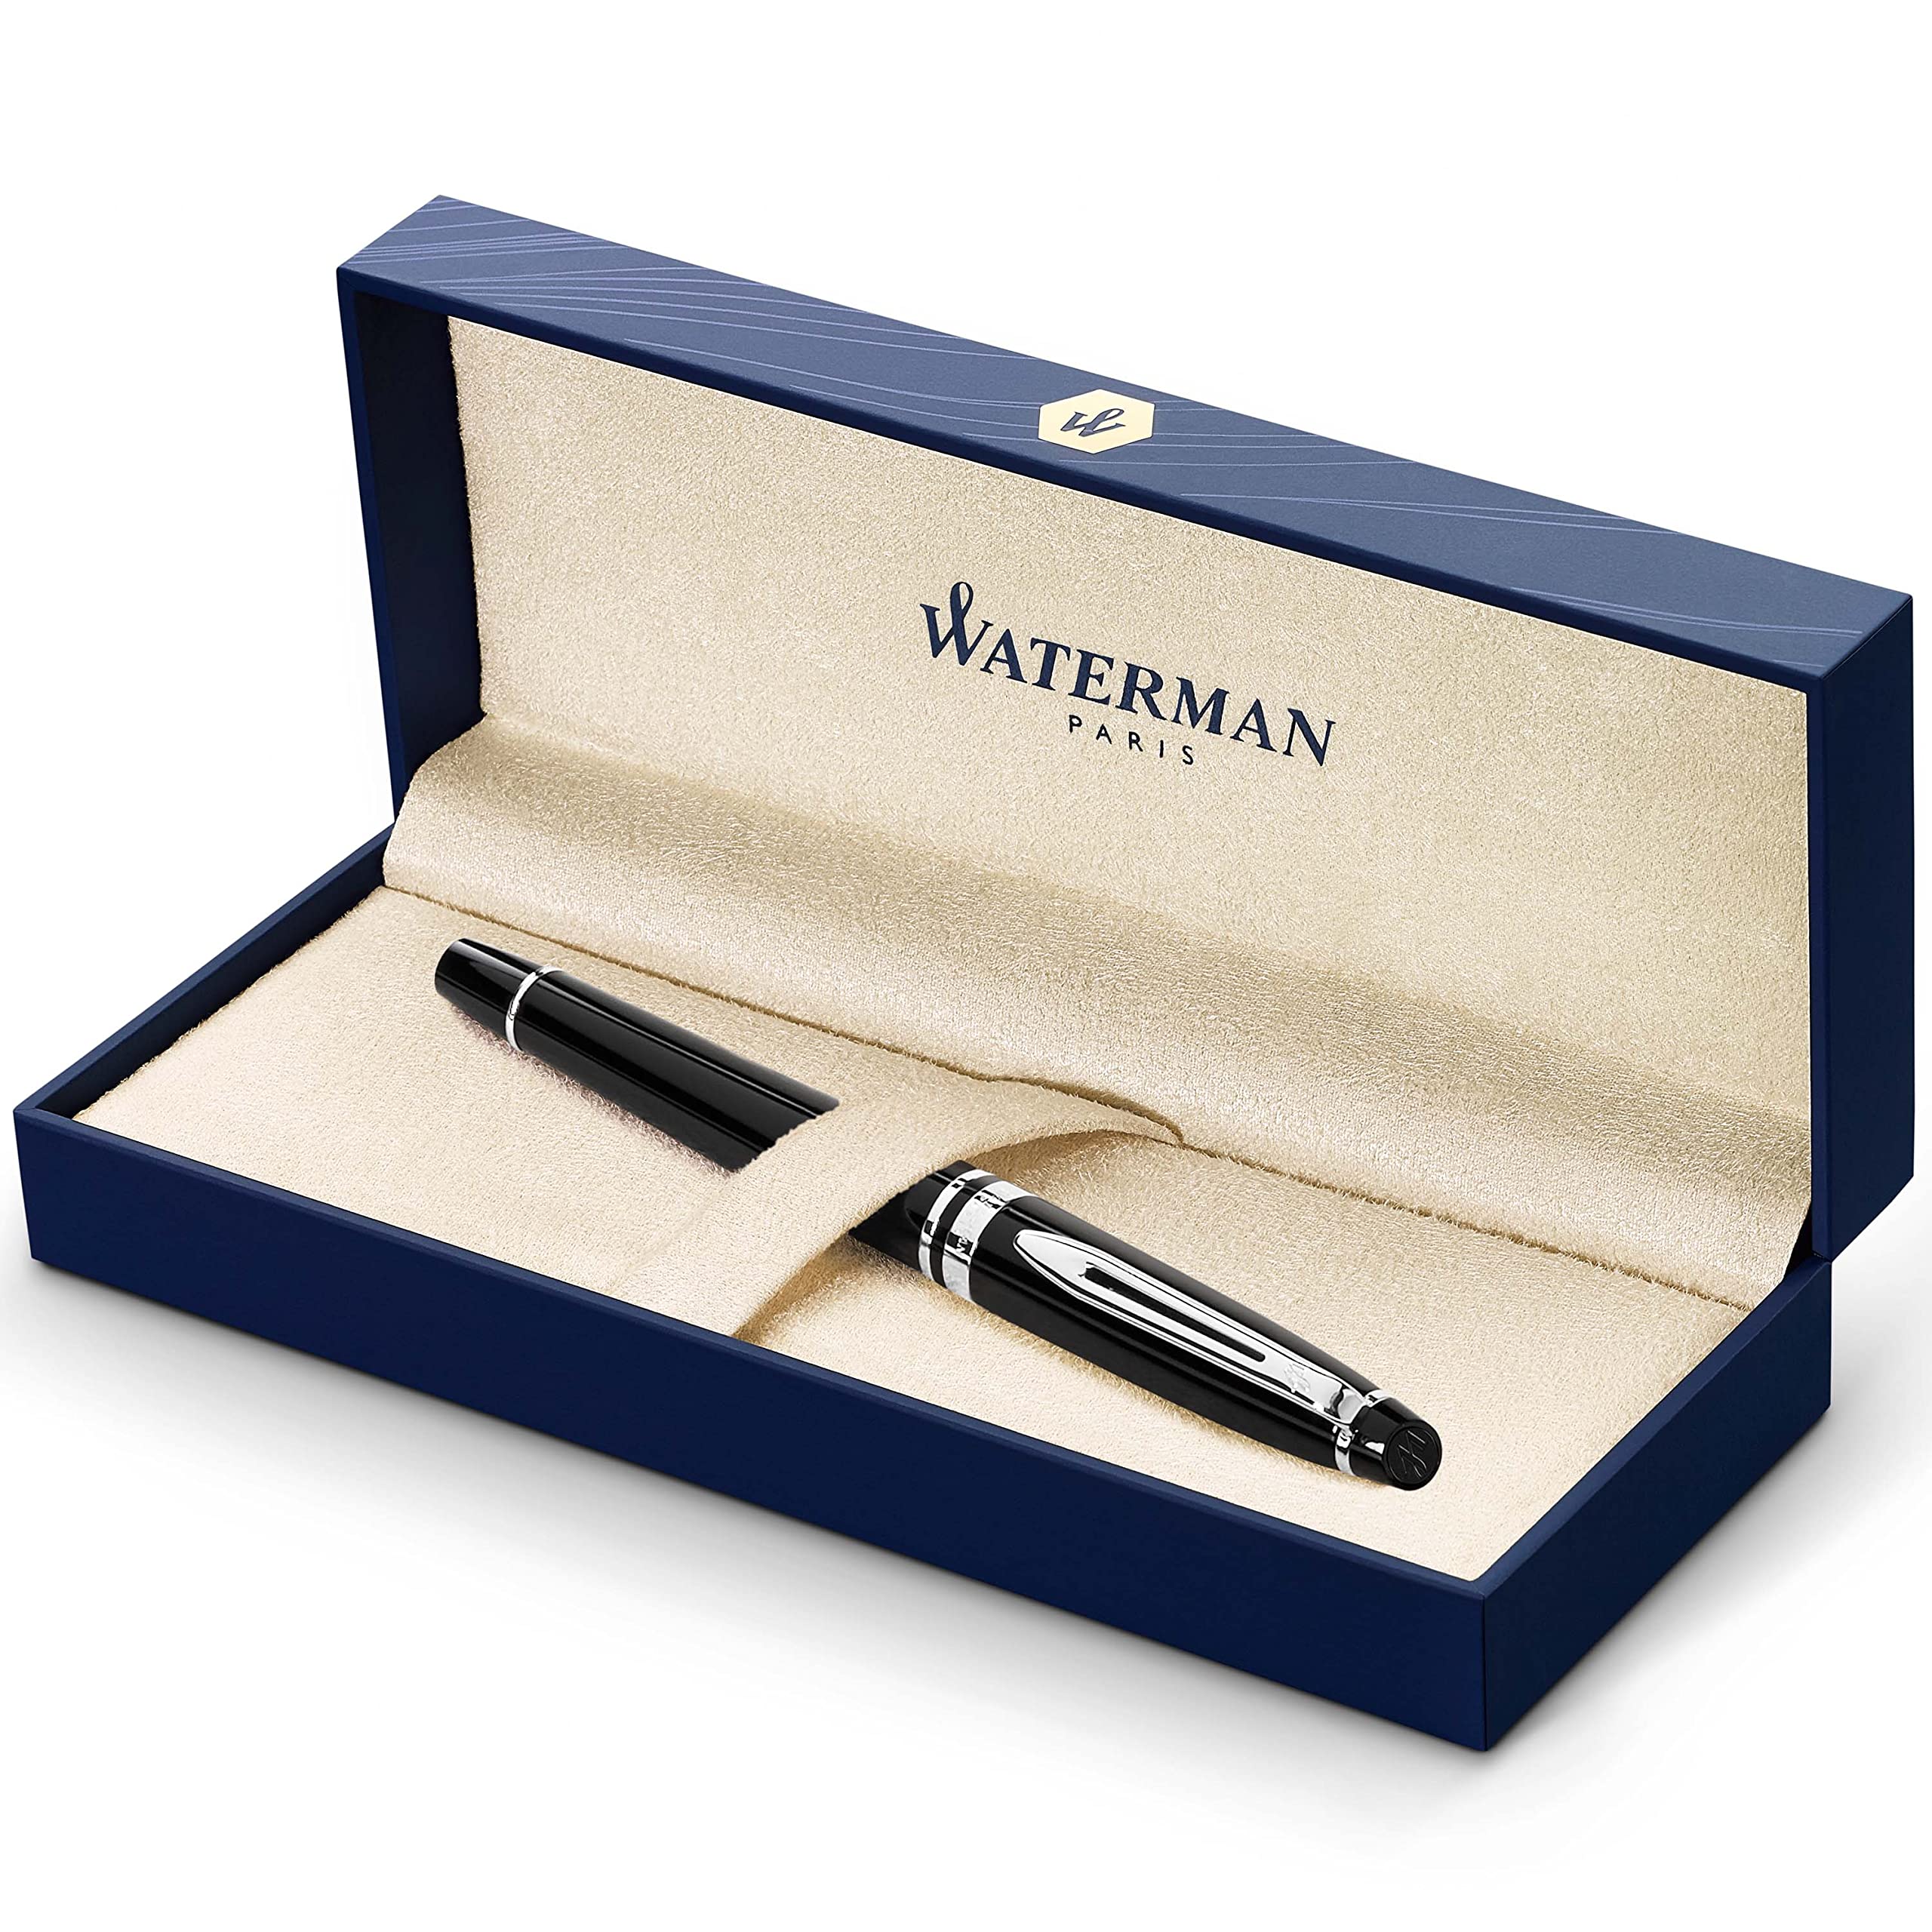 Waterman Expert Rollerball Pen - Gloss Black/Chrome Trim - Fine Point with Black Ink